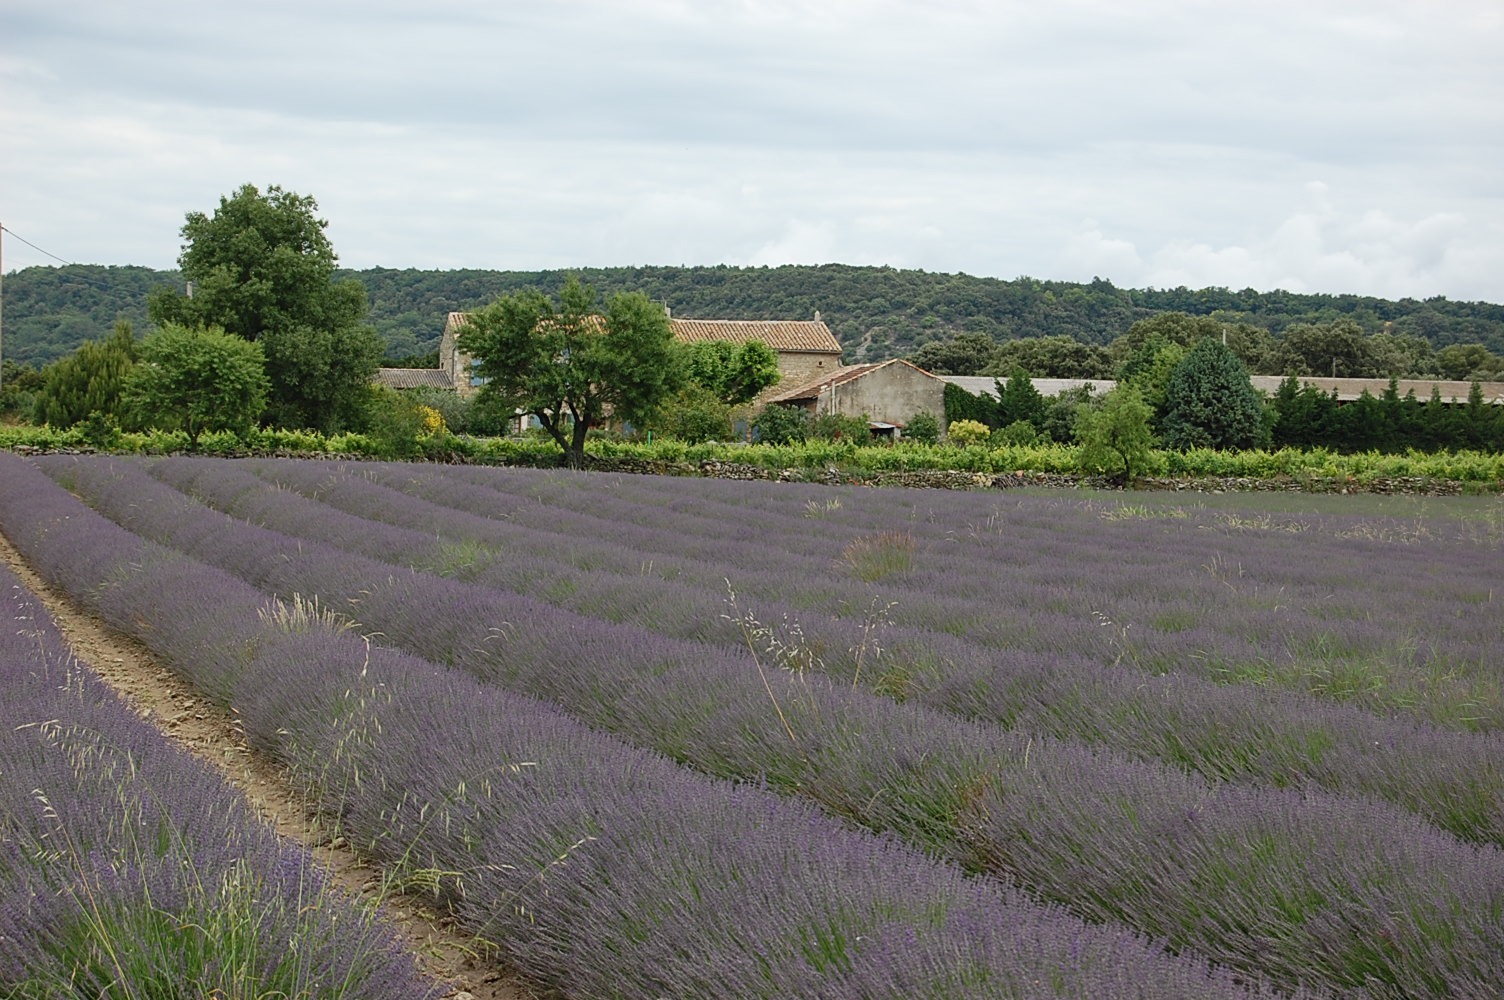 Self guided bike tour on the Lavender Route of Provence